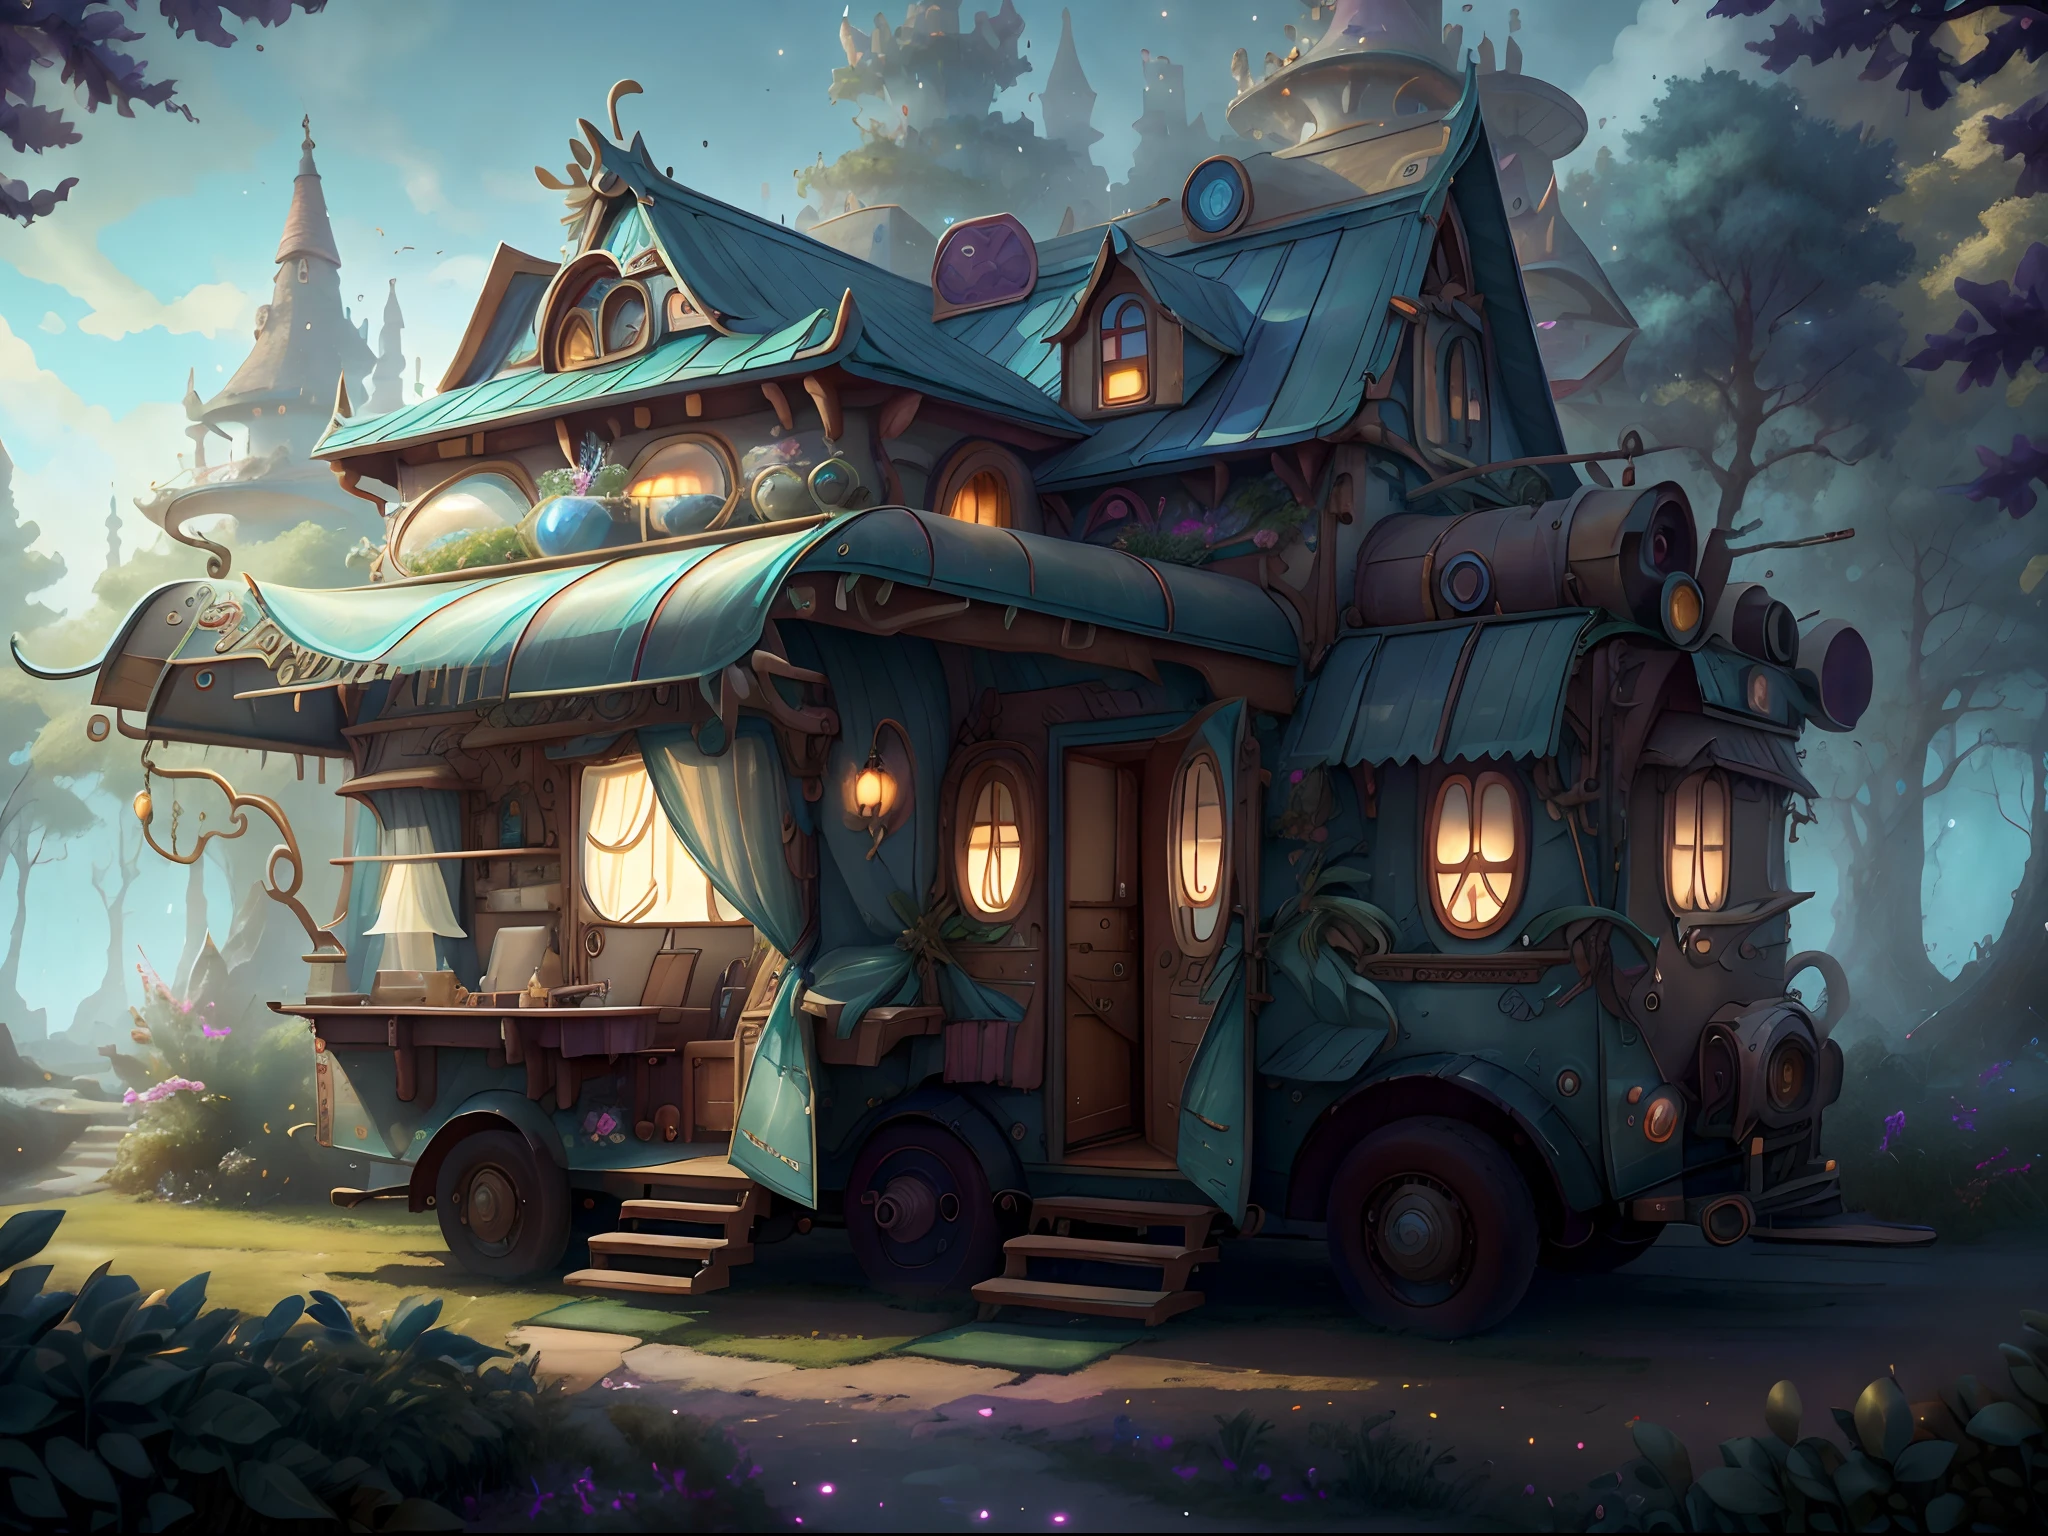 In the wizarding world，The Magic RV is a unique shape that combines magical elements with sci-fi style。They provide a comfortable living environment，It can also meet the needs of action and adventure。Let's analyze the appearance and style of the magic RV step by step，And explore details that may otherwise be overlooked。 exterior design： The exterior design of the Magic RV is extremely creative and imaginative。Above all，It has a streamlined body shape，Different from traditional motorhomes。The body surface is covered with smooth and shiny magic material，It emits a faint magical glow。These materials allow the motorhome to reduce air resistance while driving，Improve fuel efficiency。Additionally，Magic materials also have the ability to heal themselves，Able to repair  injuries on their own。 Windows and lights： The windows of the Magic RV are made of special materials，With transparency adjustment function。By adjusting the magic energy，Passengers can switch the transparency of the windows at will，From fully transparent to absolutely opaque，Implement privacy protection。Additionally，Magic screen technology is incorporated into the windows，Virtual scenes can be projected onto windows，Give passengers an immersive feeling。 RV living space： Go inside the RV，You will be blown away by the spacious and luxurious living space。The Magic RV is designed with an intelligent layout，Features a multifunctional area。The living room area comes with comfortable sofas and a TV wall，Passengers can relax in it。The kitchen area features a state-of-the-art magic stove and fridge，It can meet all kinds of gastronomic needs。The bedroom area is equipped with a magic bed，The hardness and shape can be adjusted according to personal preferences，Ensure good sleep quality。 Powertrain with special features： The power system of the Magic RV is powered by Magic Crystals。These crystals have powerful energy storage and conversion capabilities，A long-lasting and reliable source of power for motorhomes。Additi